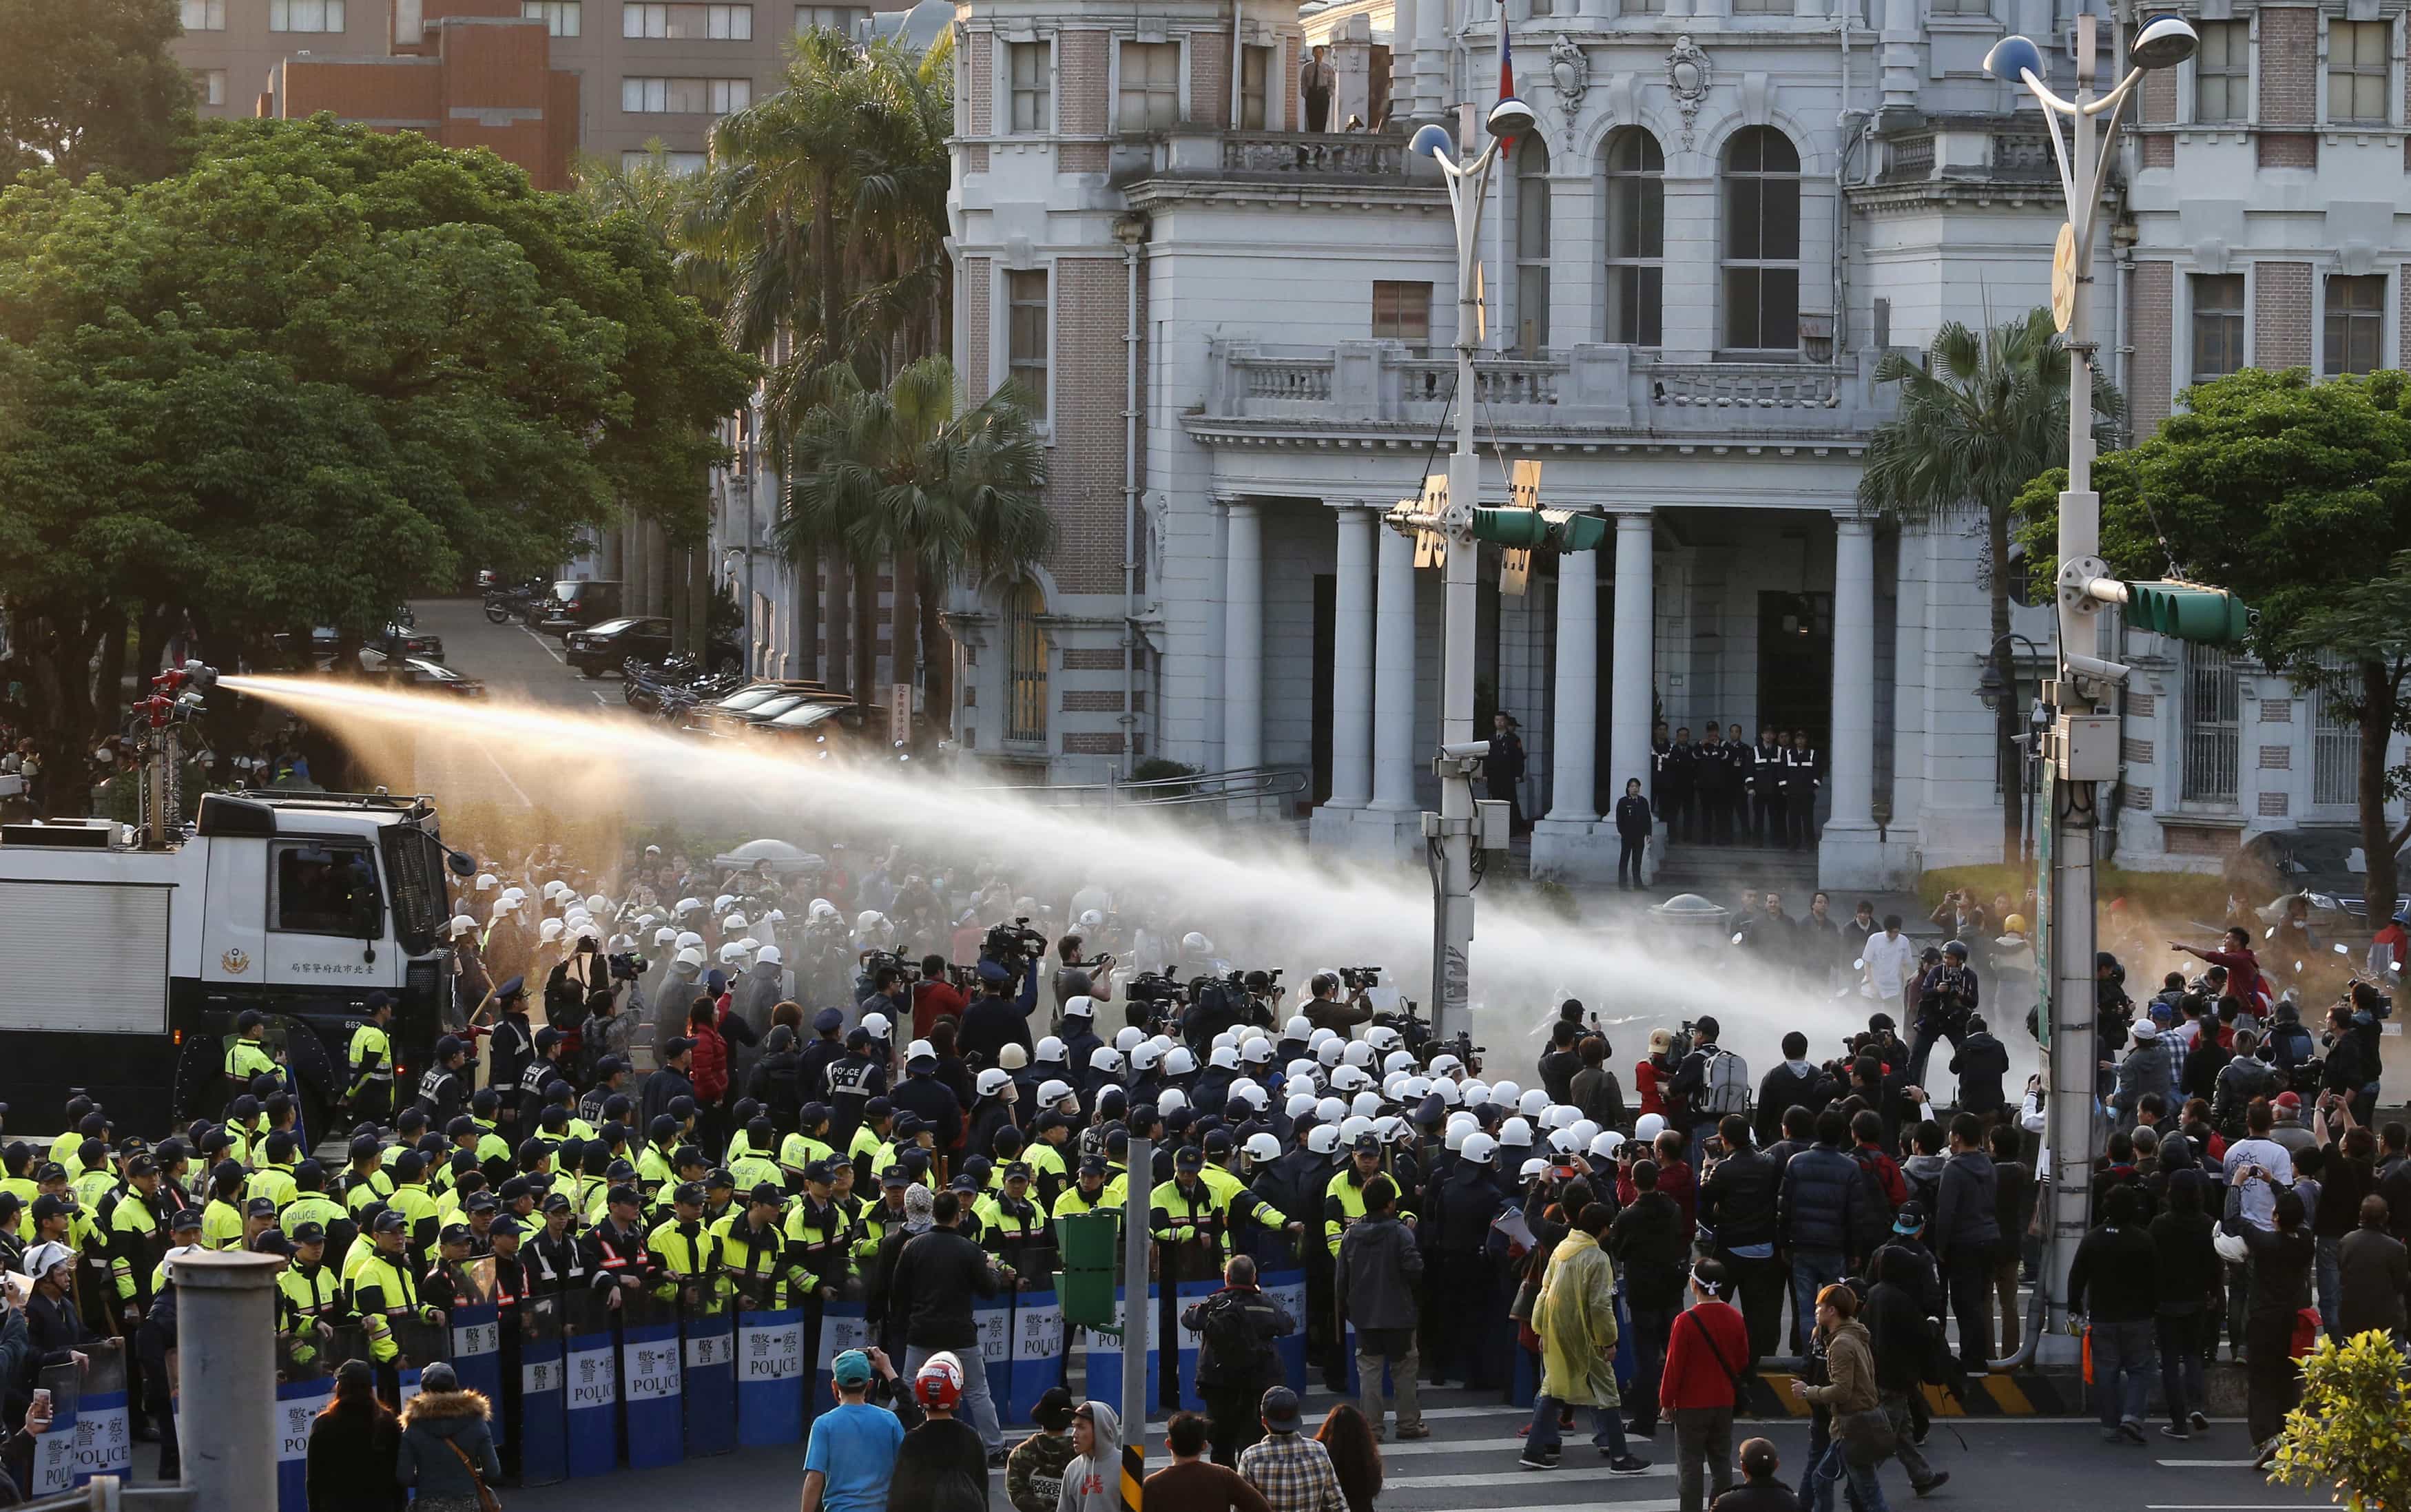 Police use water cannons to disperse demonstrators as they protest against a trade pact with mainland China, near Taiwan's government headquarters in Taipei, 24 March 2014, REUTERS/Edward Lau